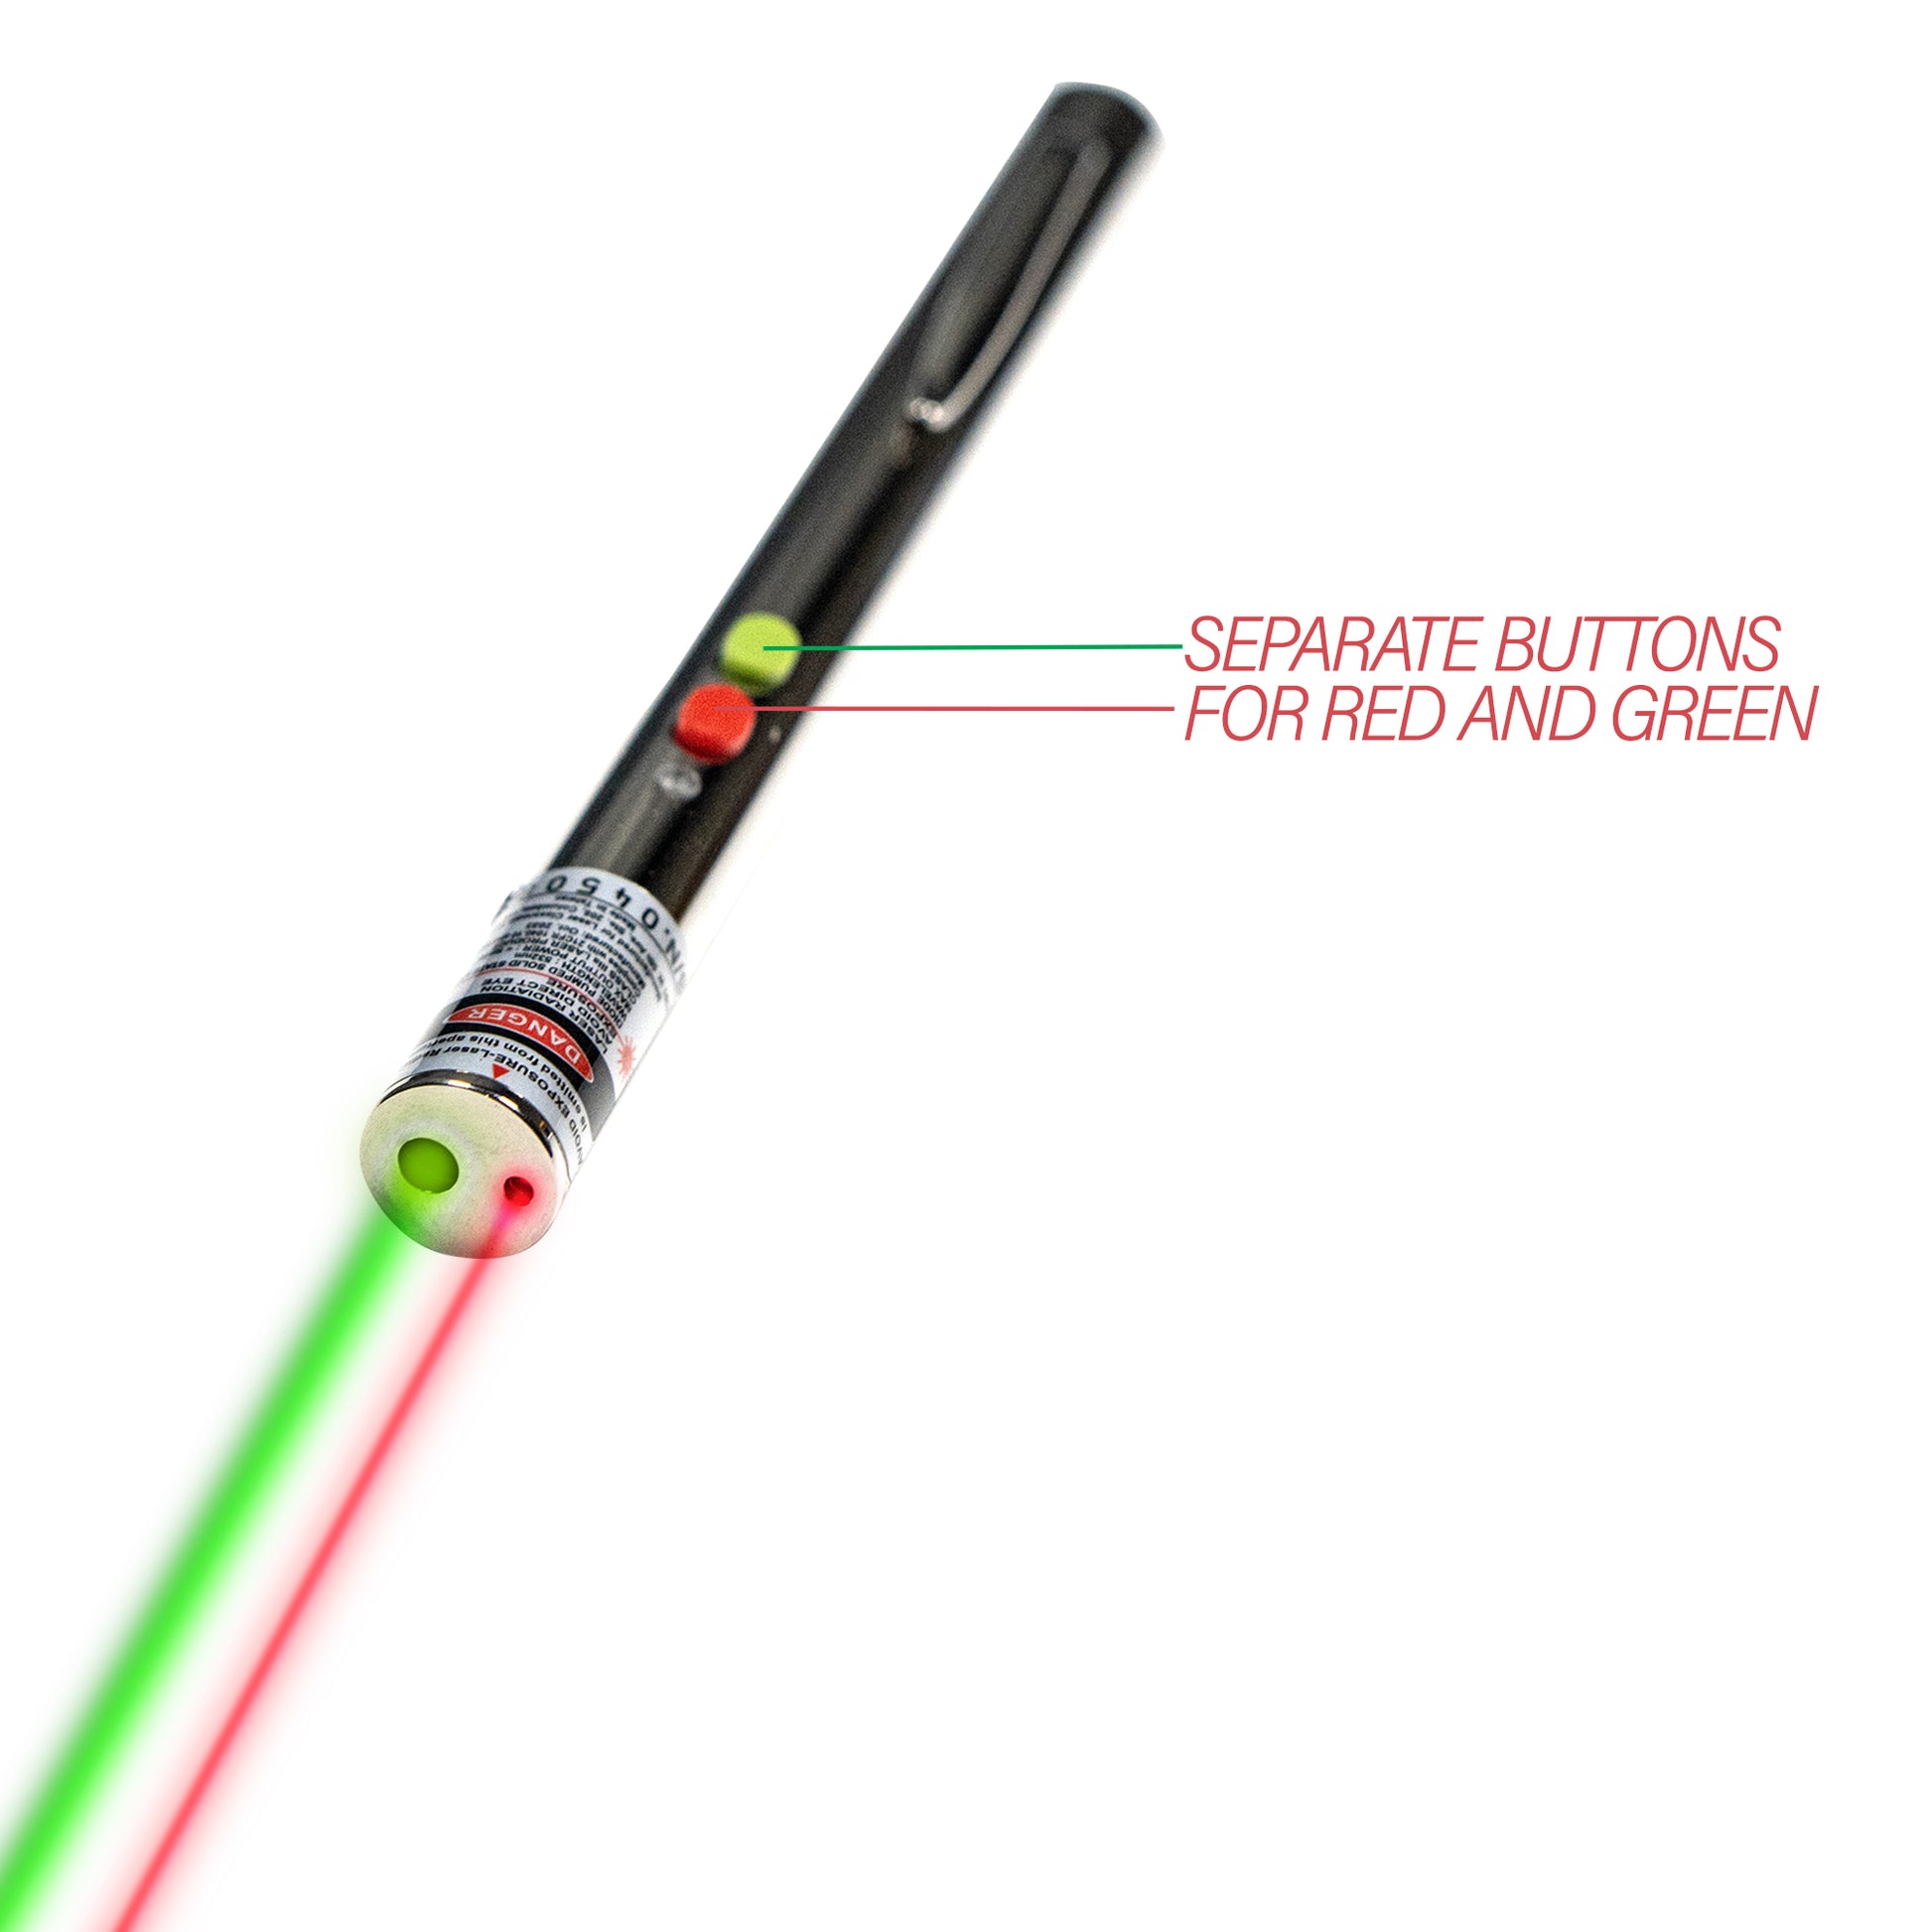 Laser Pointer Pen Smart Style Red & Green Laser Small 2 PCS : High Power  Burning Laser Pointers,DPSS Laser Diode LD Modules, Kinds of laser products